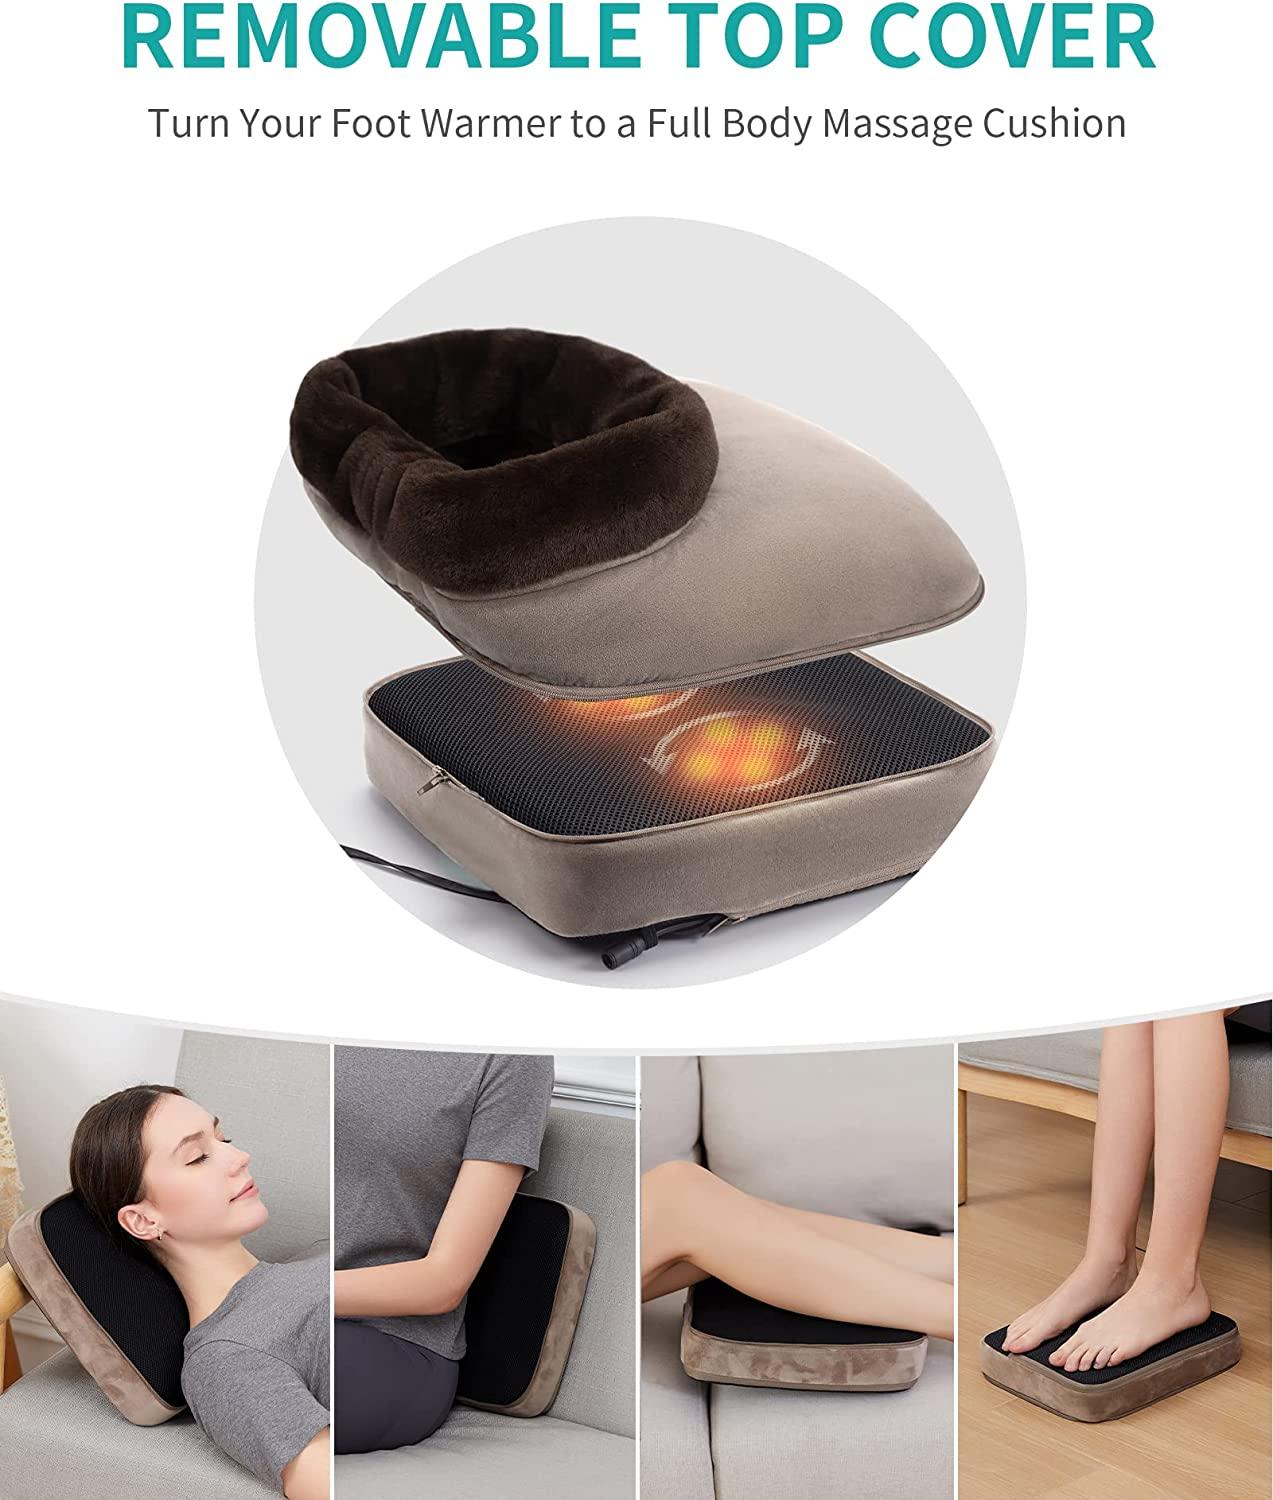 Nekteck Neck and Back Massager,Foot and Calf Massager with Heat